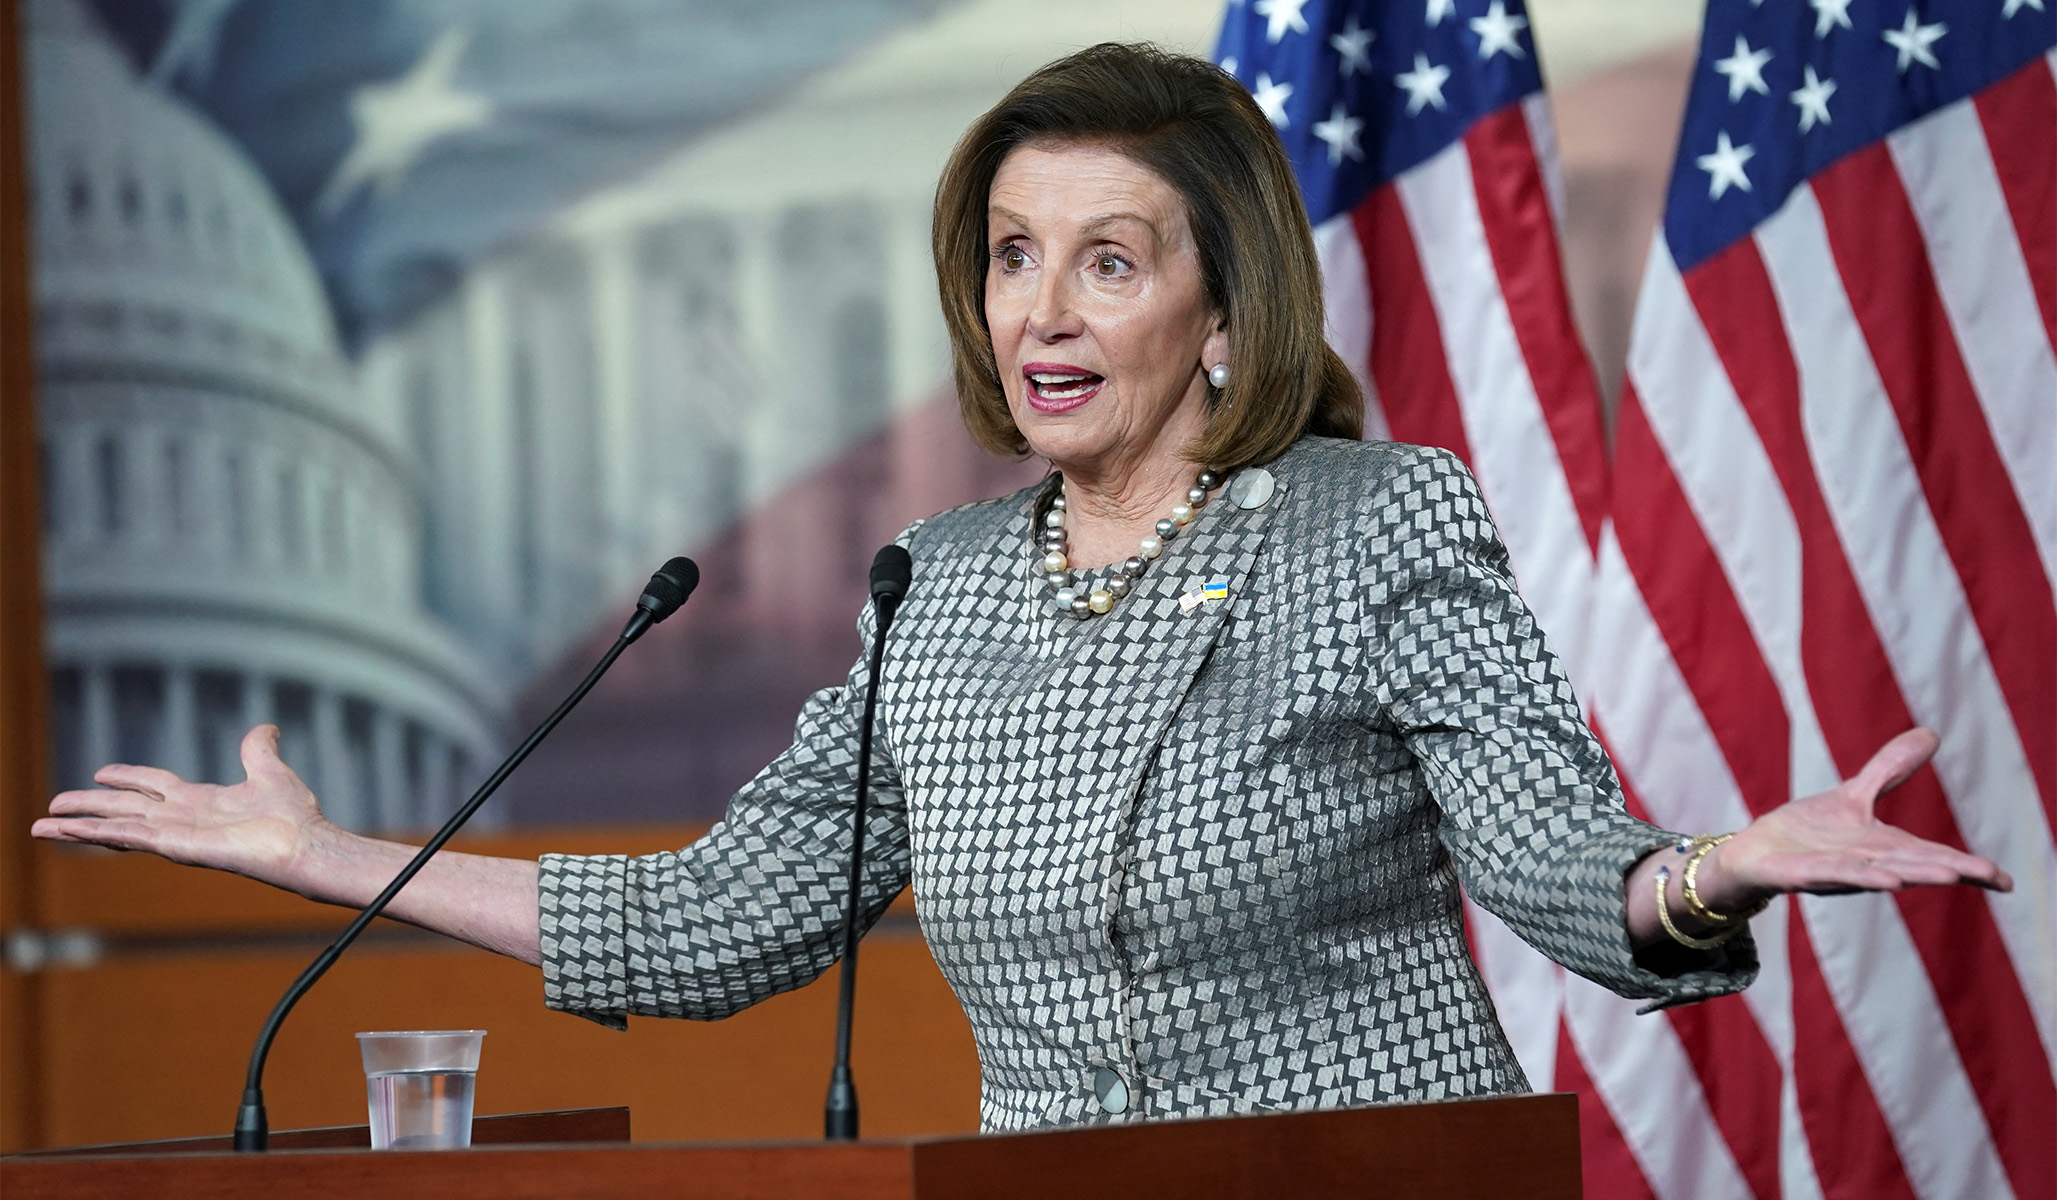 Nancy Pelosi said Biden violated the law and can now be impeached